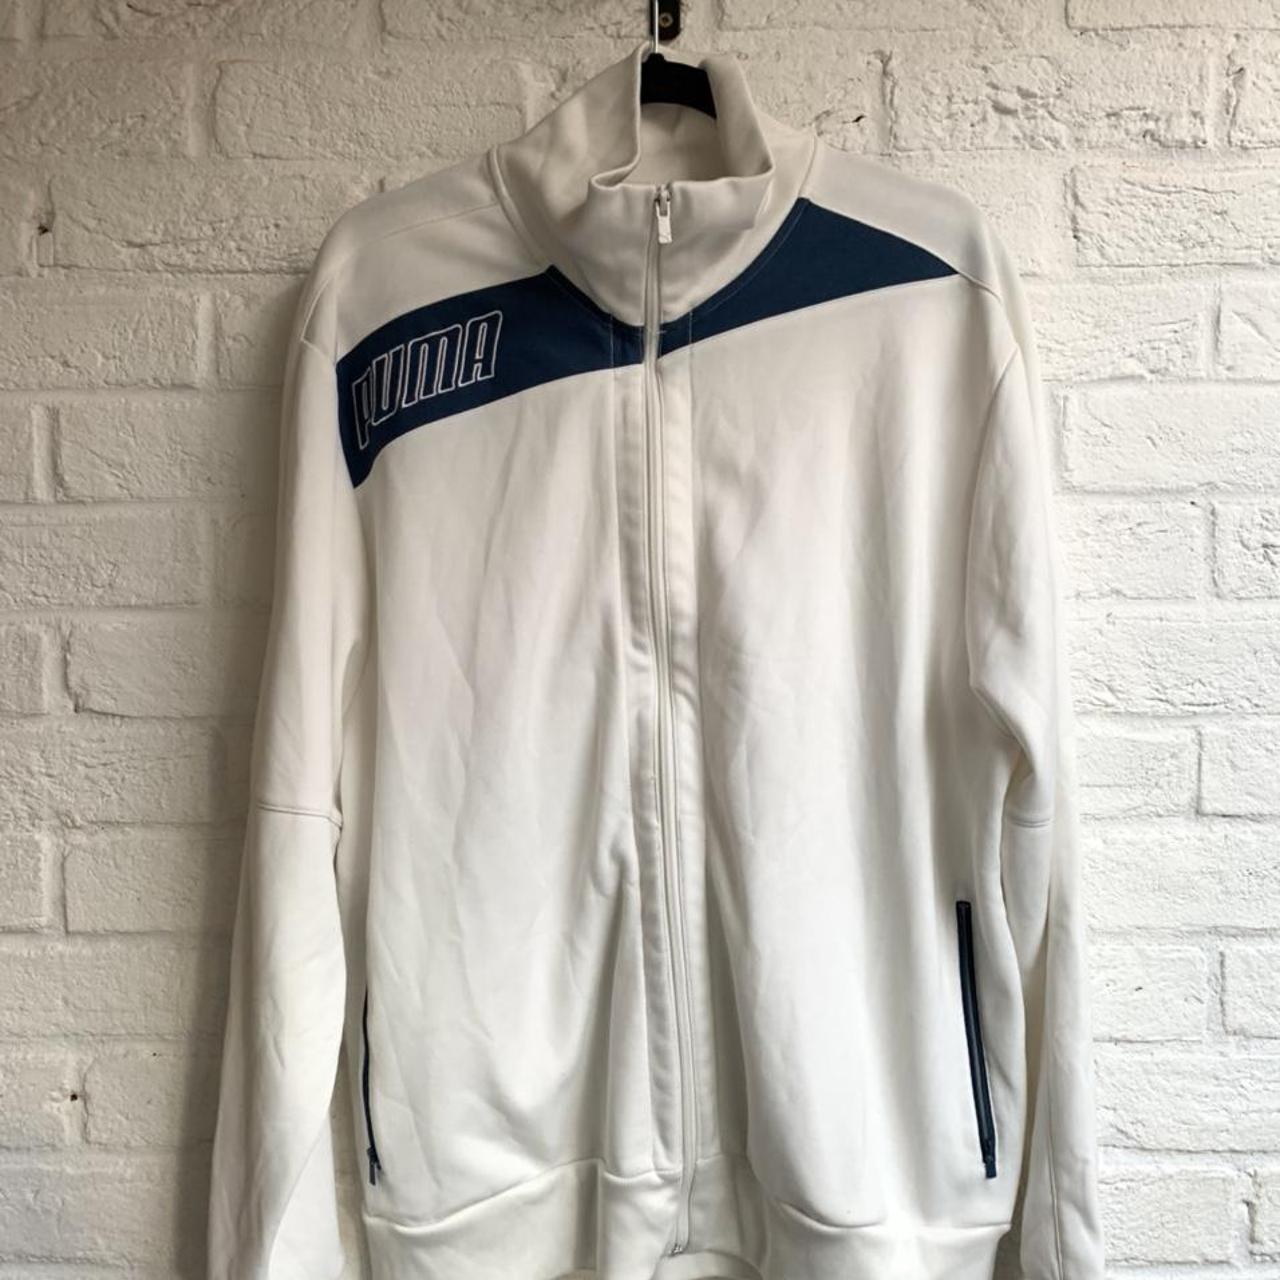 Vintage retro puma track jacket!! Bought from a... - Depop